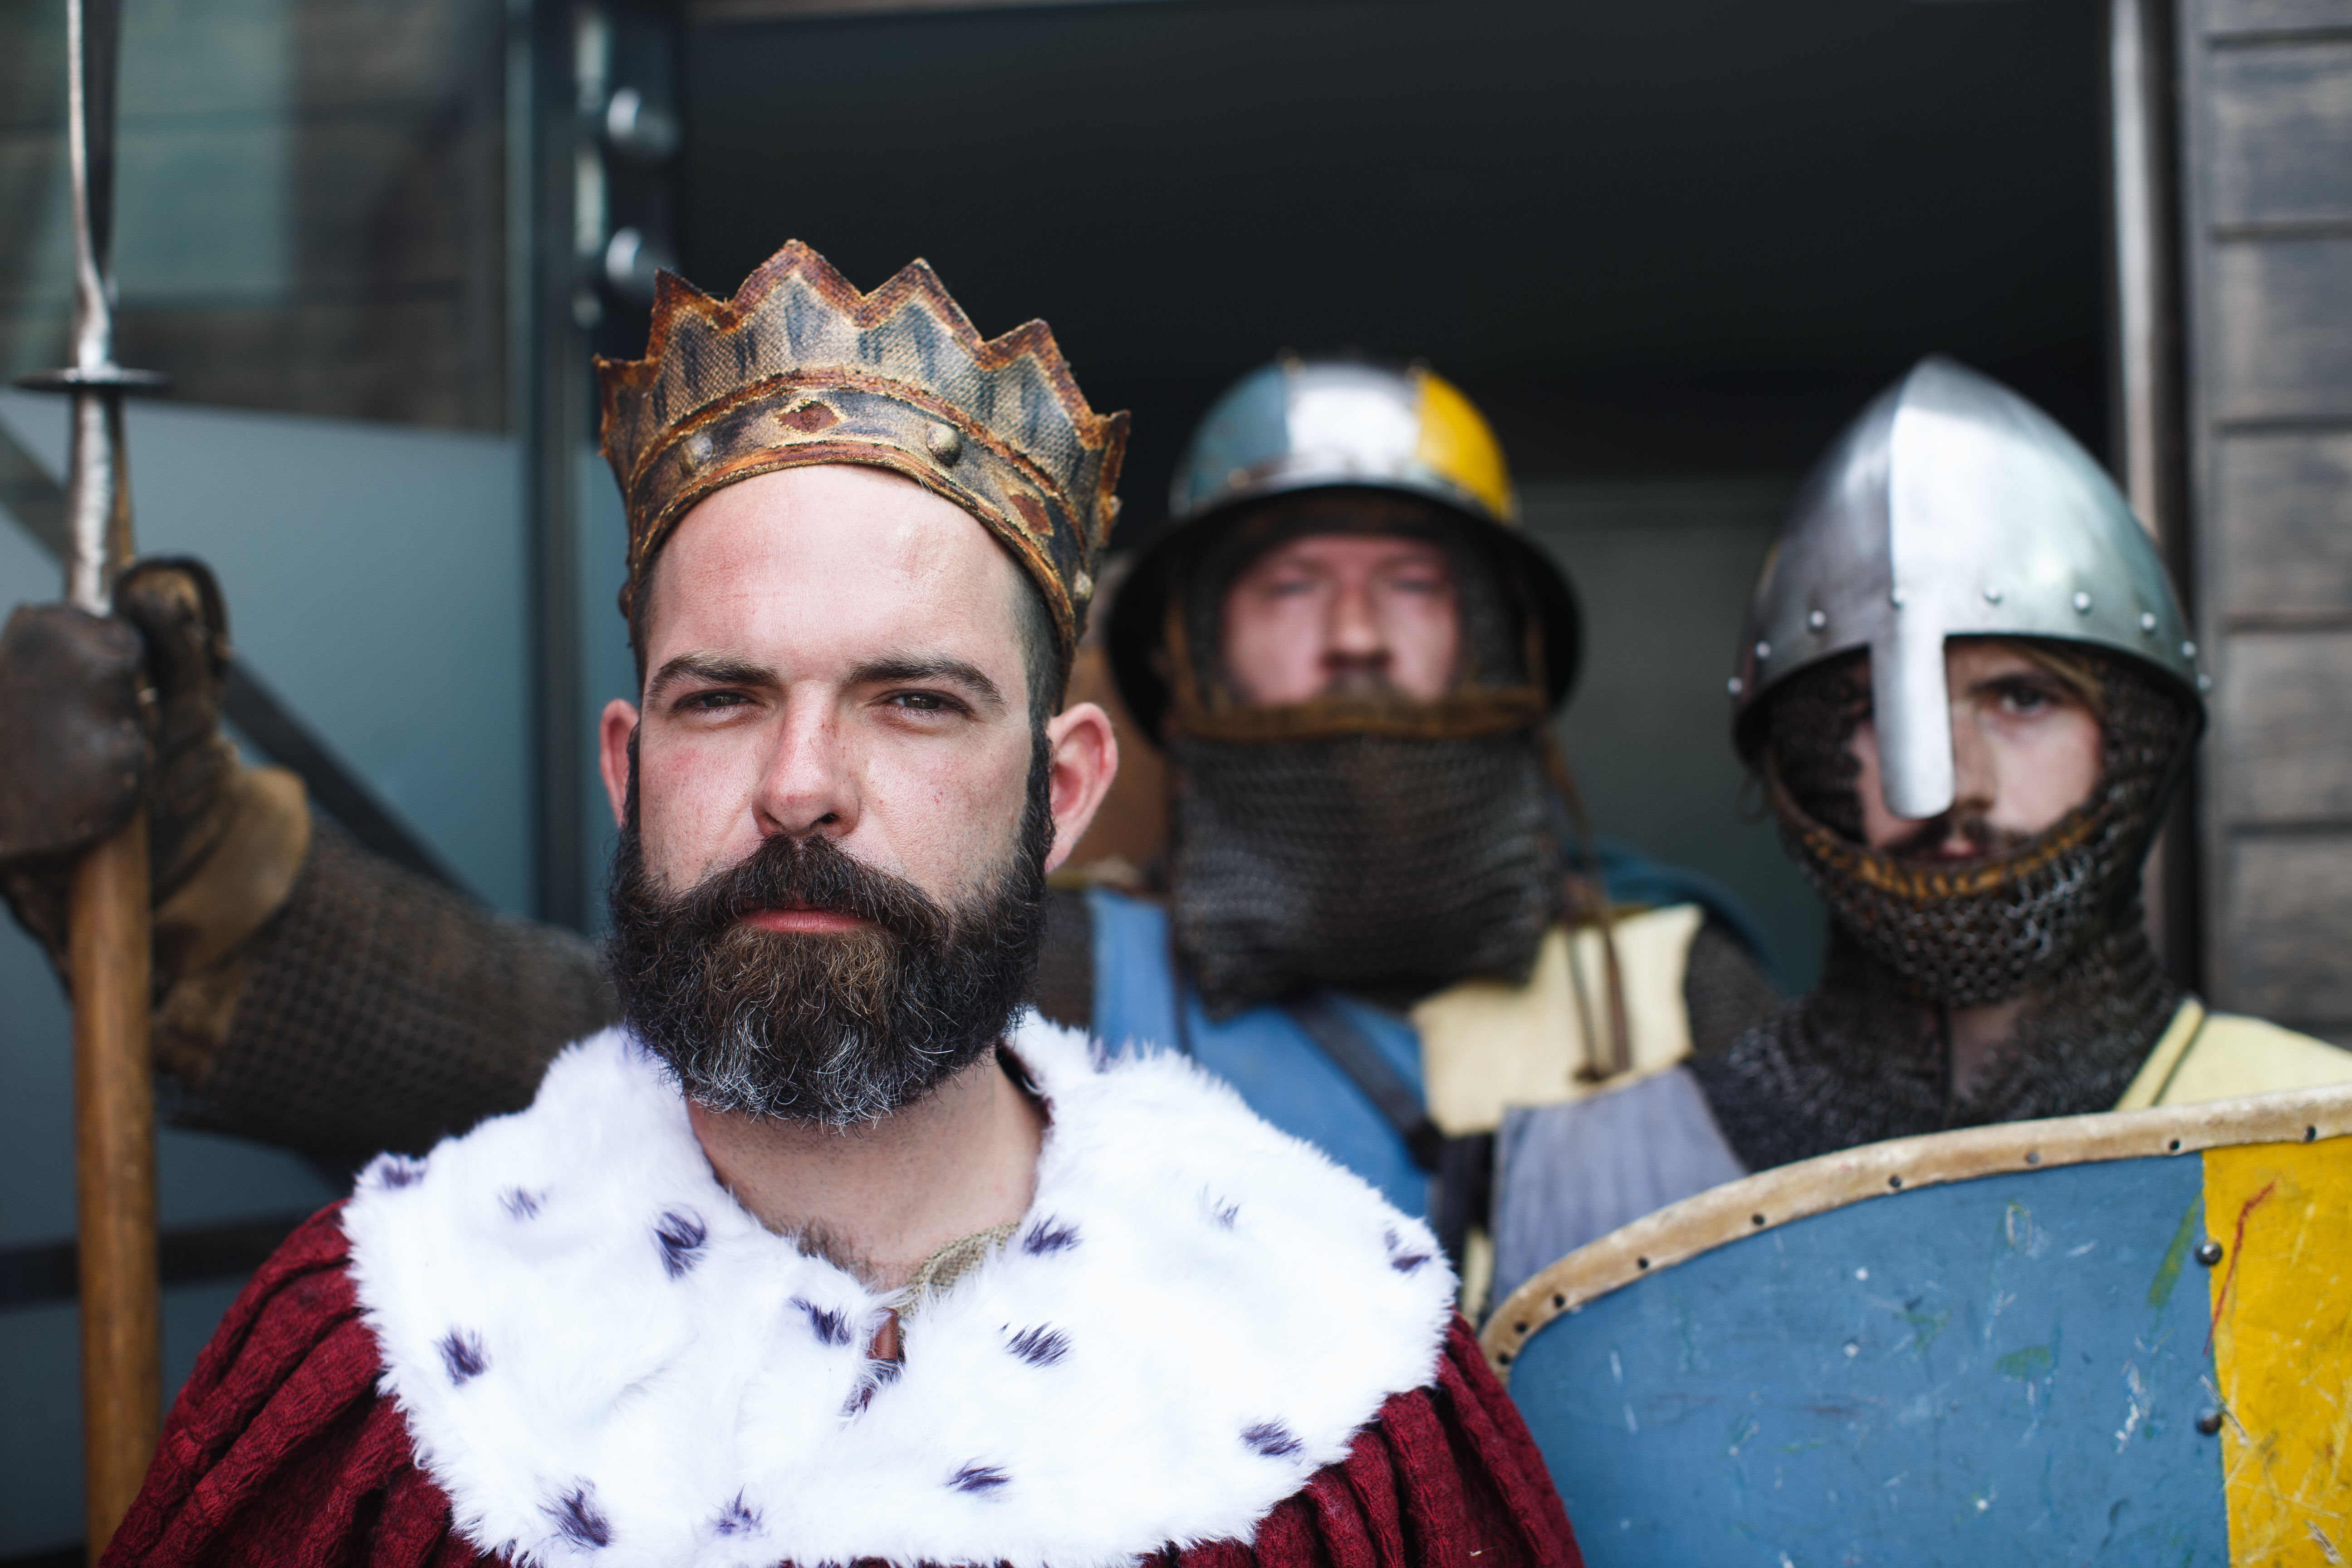 Three men, one dressed as a medieval king and two as knights